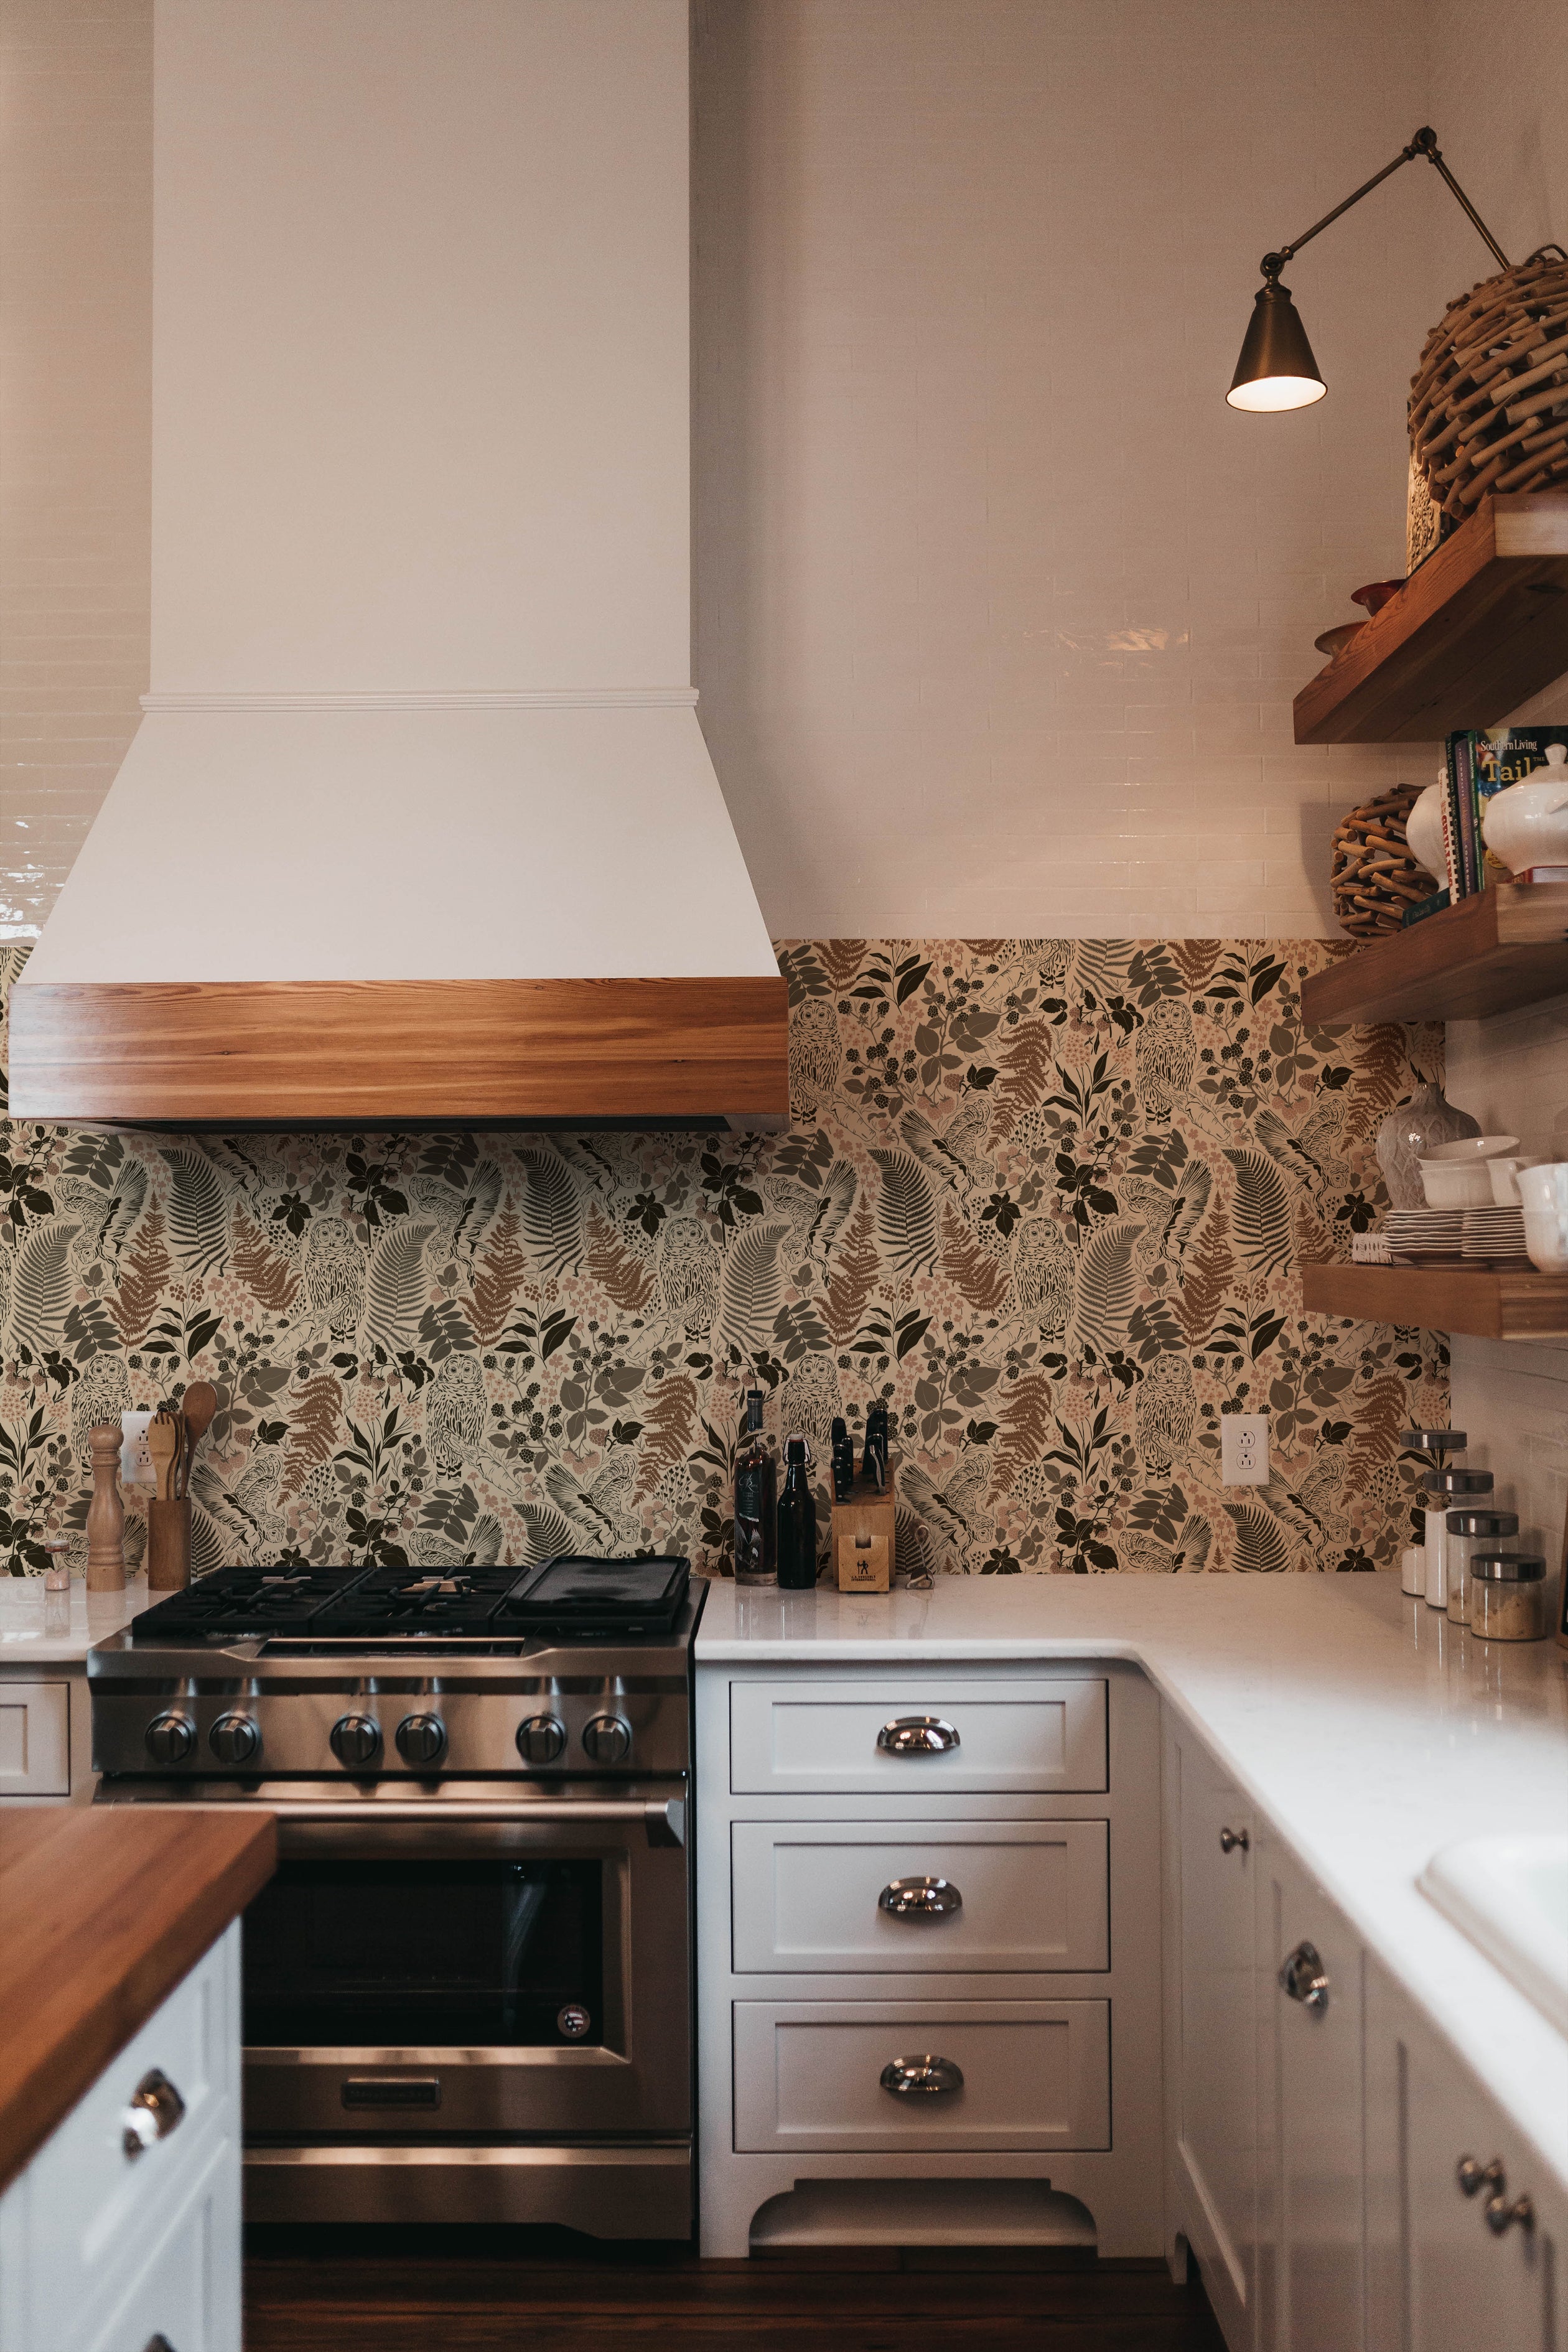 A modern kitchen with a stylish backsplash featuring owl and foliage pattern wallpaper in neutral tones, harmonizing with wooden shelves and white cabinetry